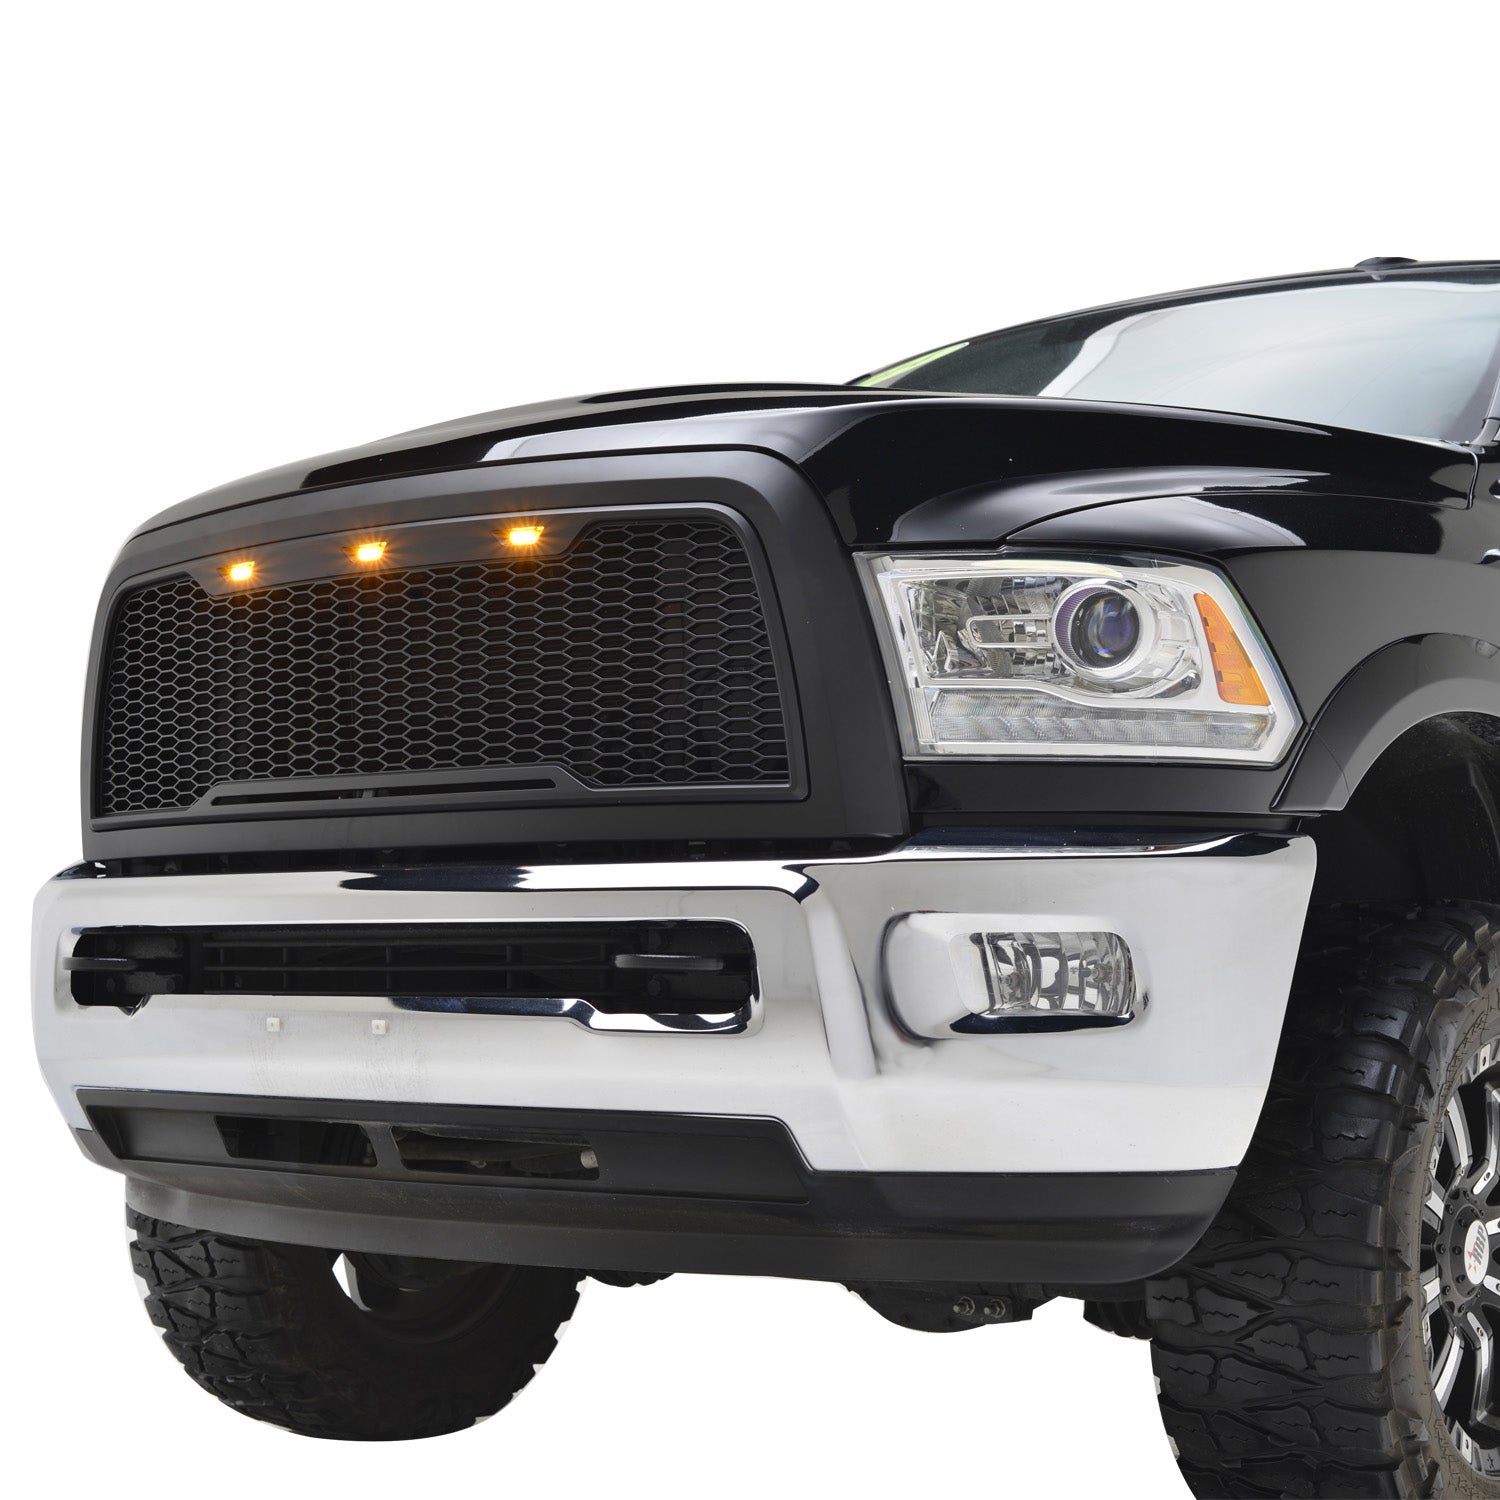 Spec-D Tuning Matte Black Rebel Style Front Grille w/Amber LED Lights  Compatible with 2010-2018 Dodge Ram 2500 3500 Truck